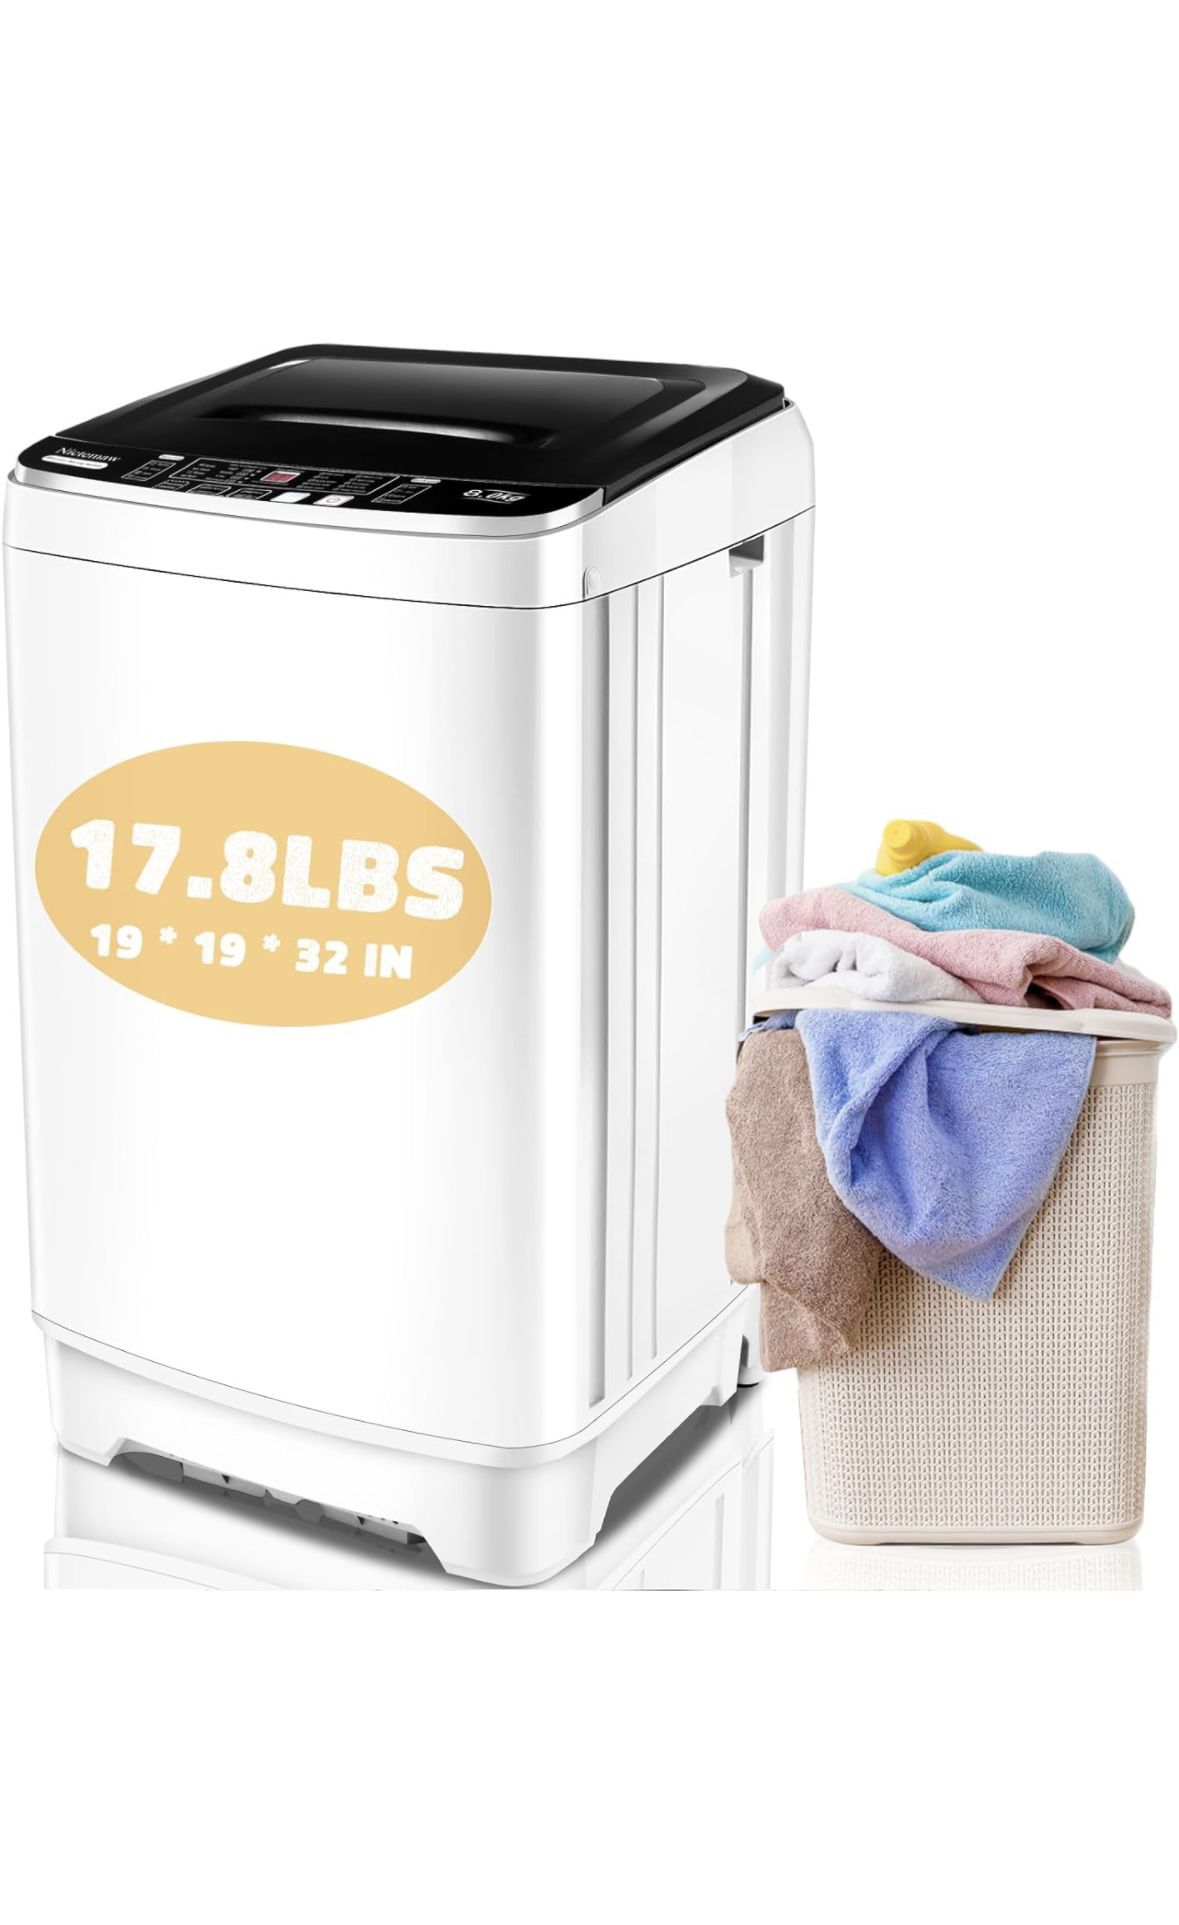 Portable Washer and Spin Dryer Nictemaw 3’x1.5’ 17.8 Lb Grey 